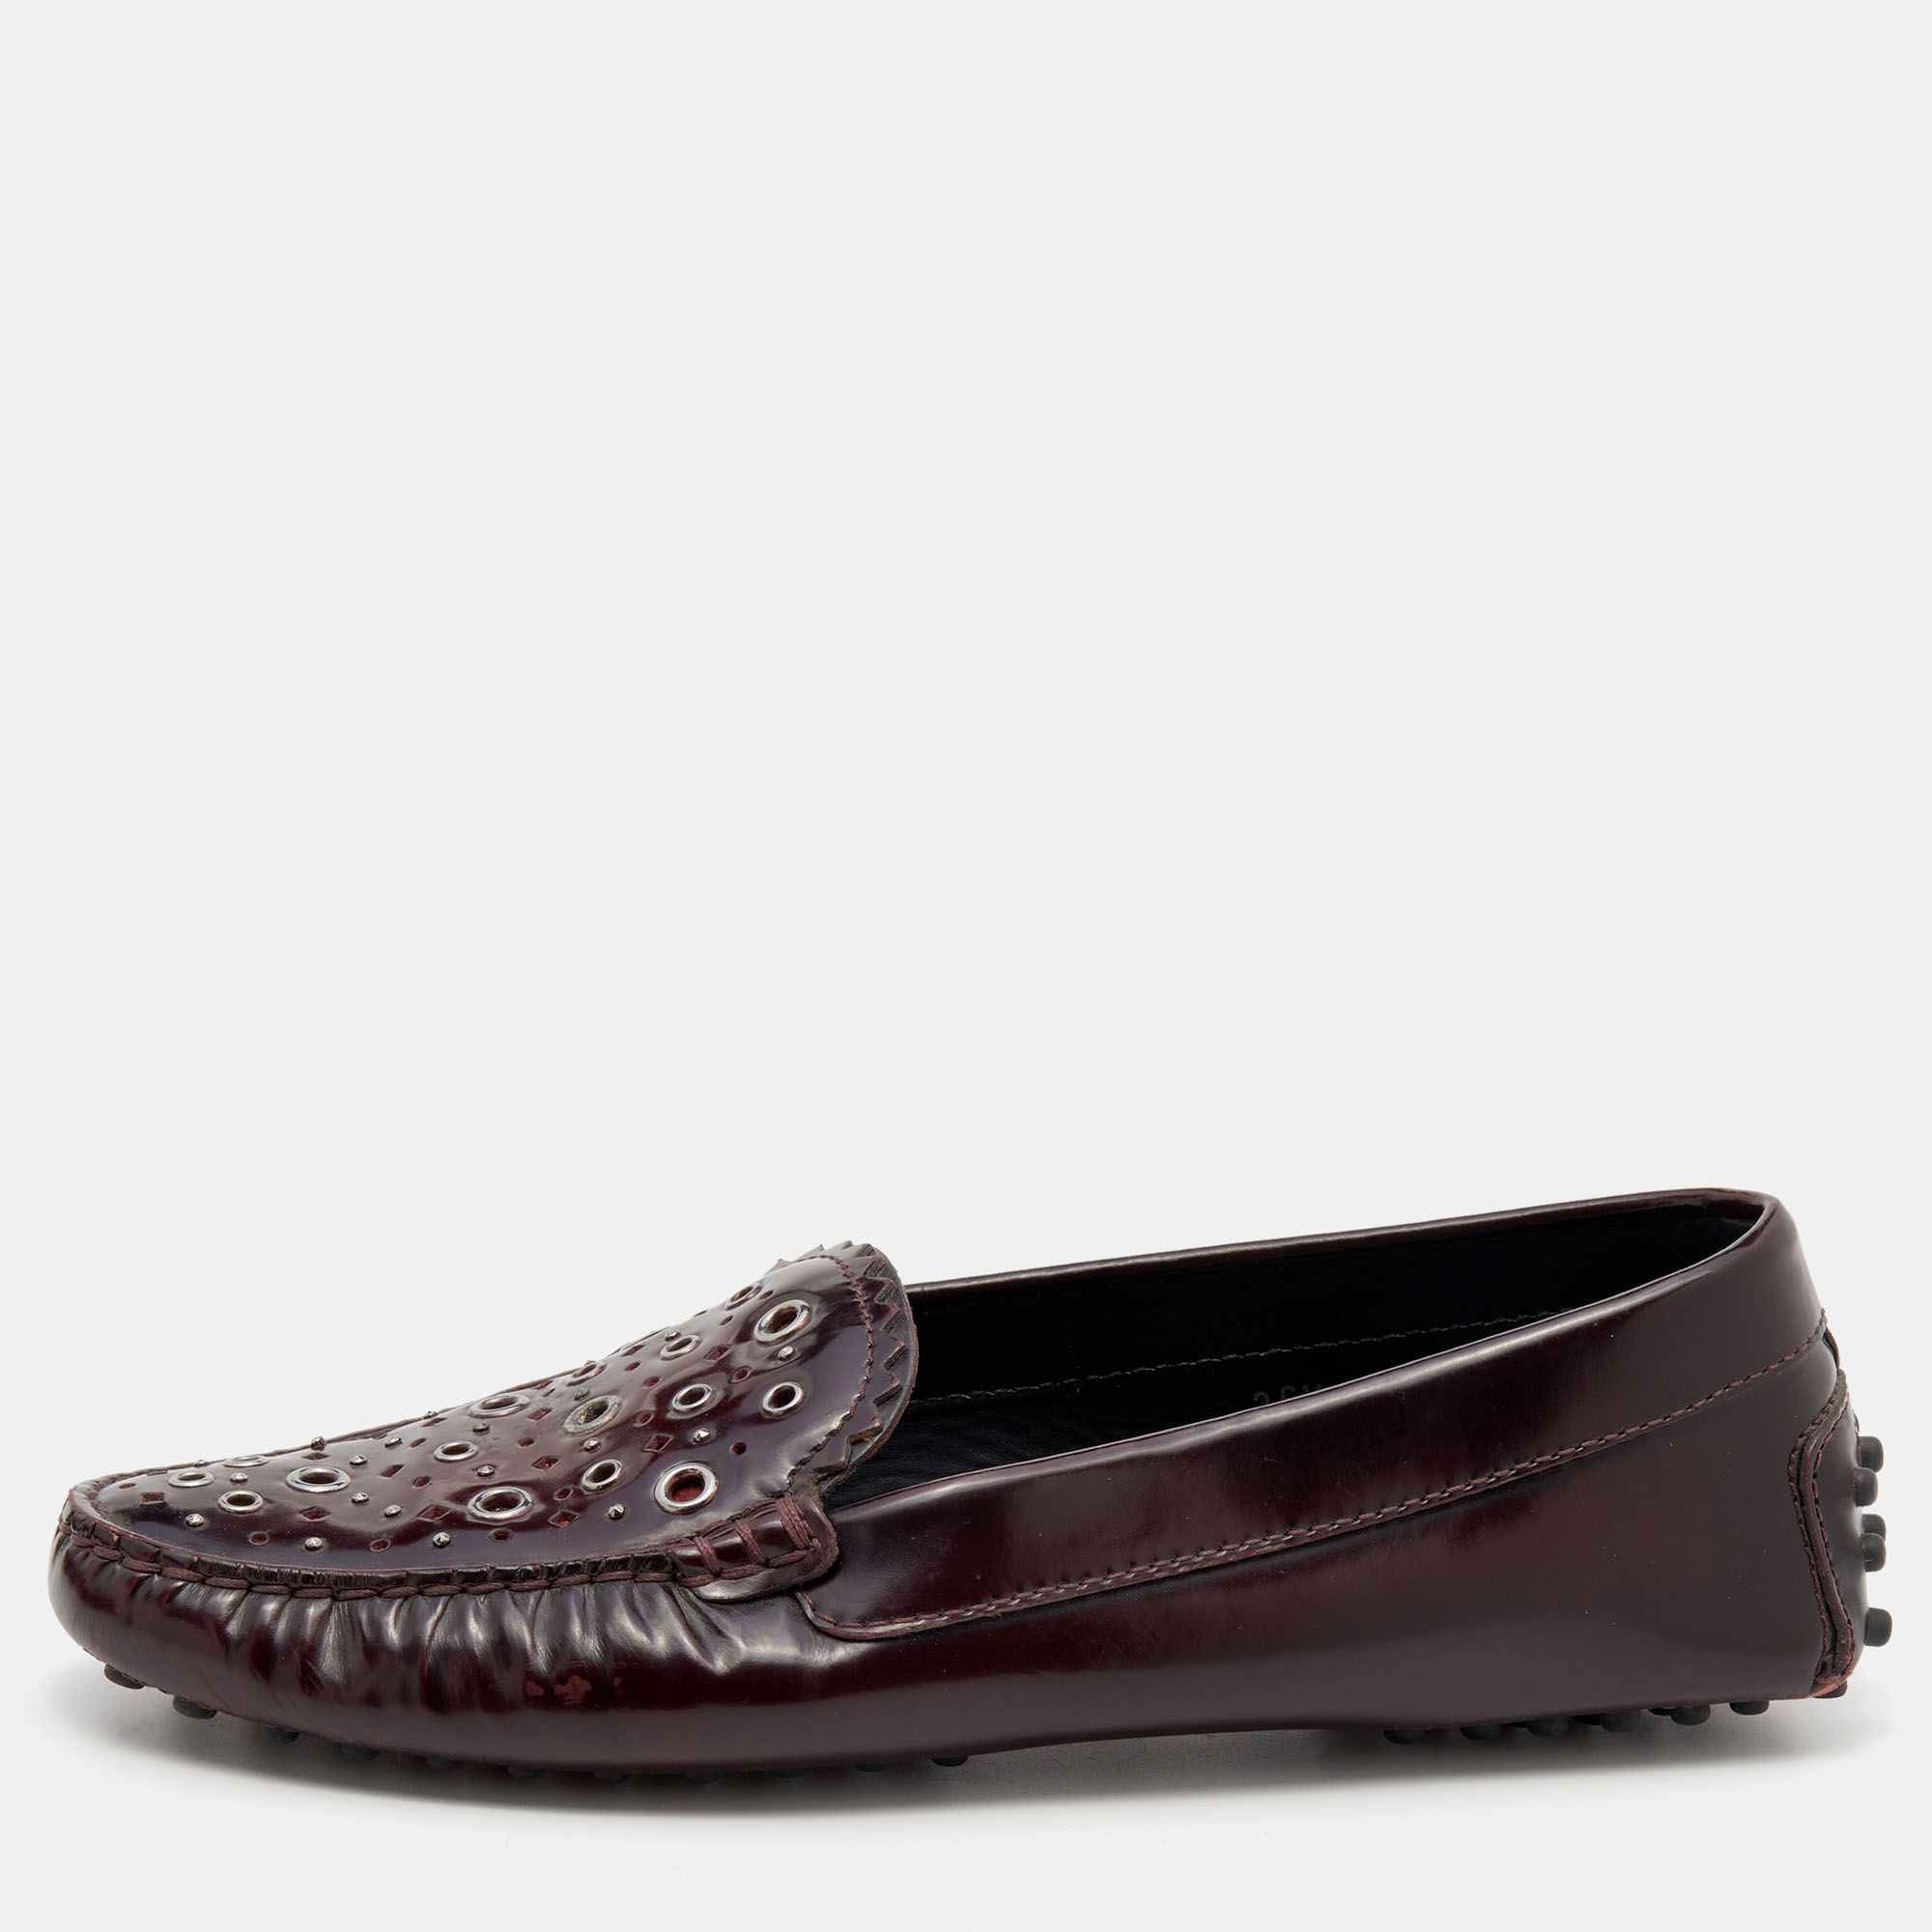 

Tod's Burgundy Patent Leather Laser Cut Loafers Size